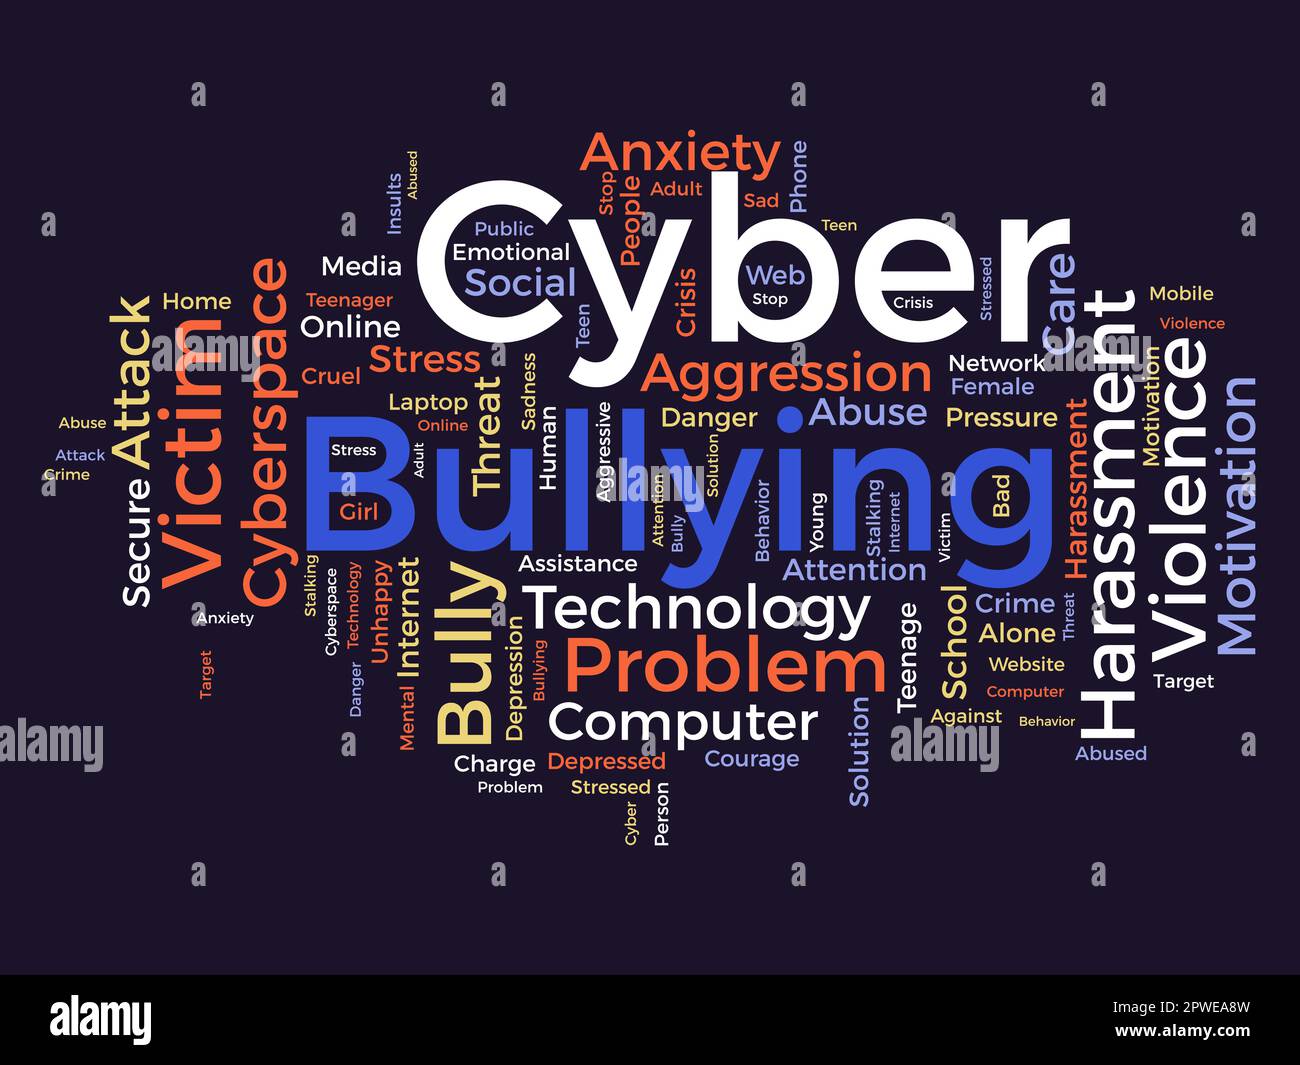 Cyber Bullying and Online Crime Concept, Vectors